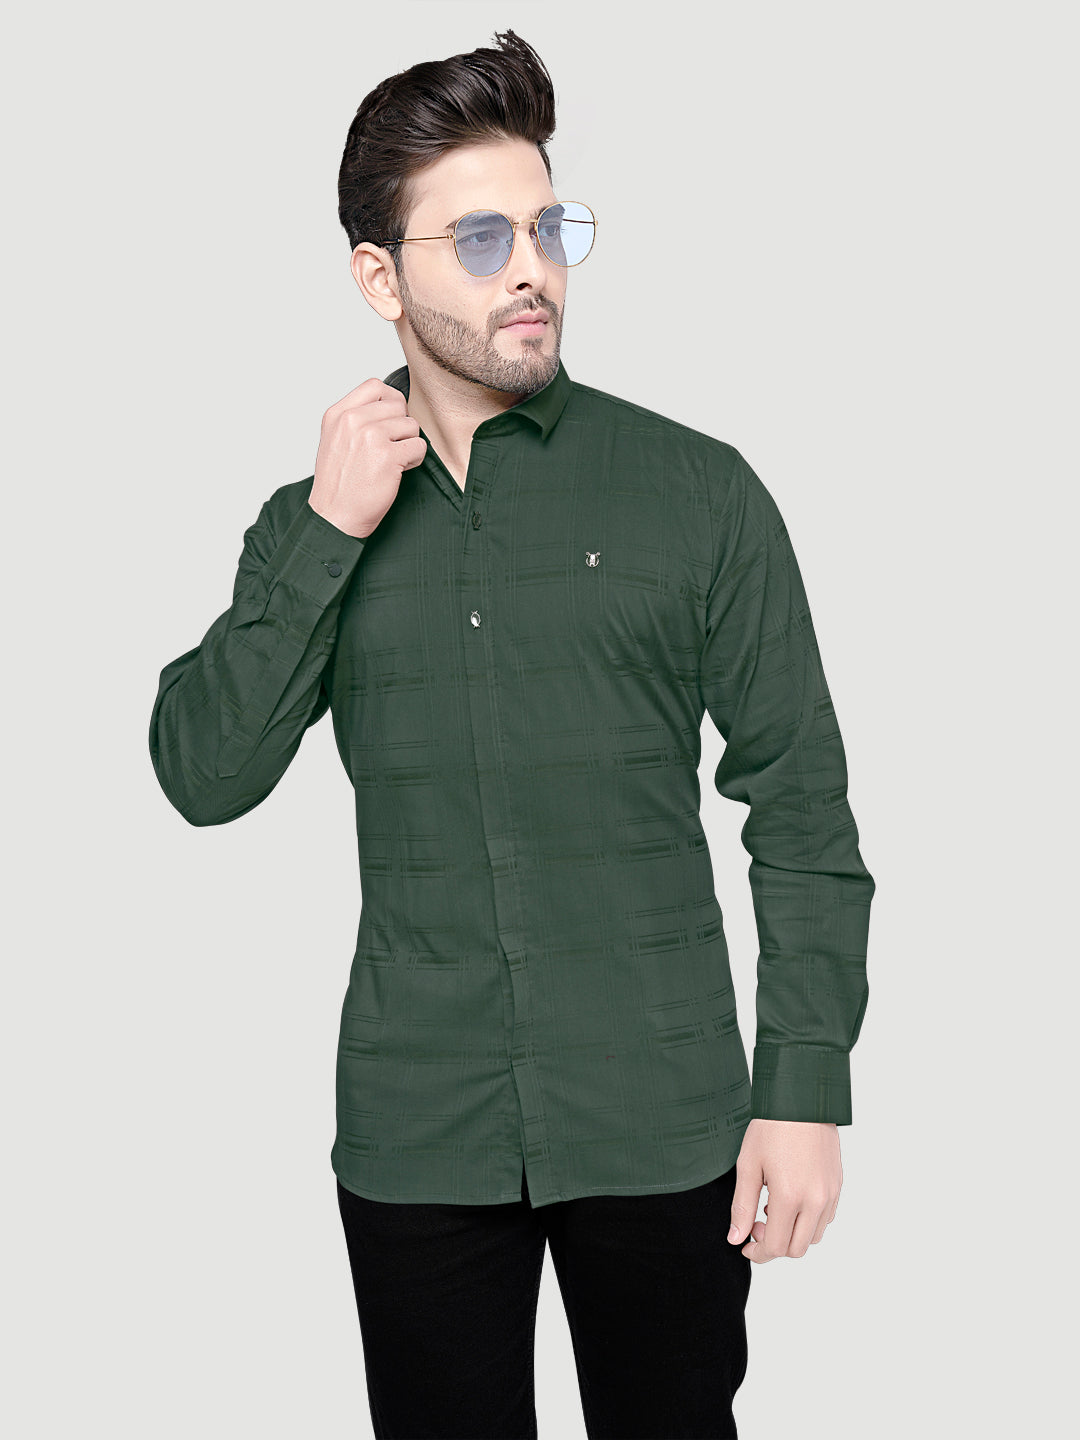 Designer Shirts with Collar Accessories- Green